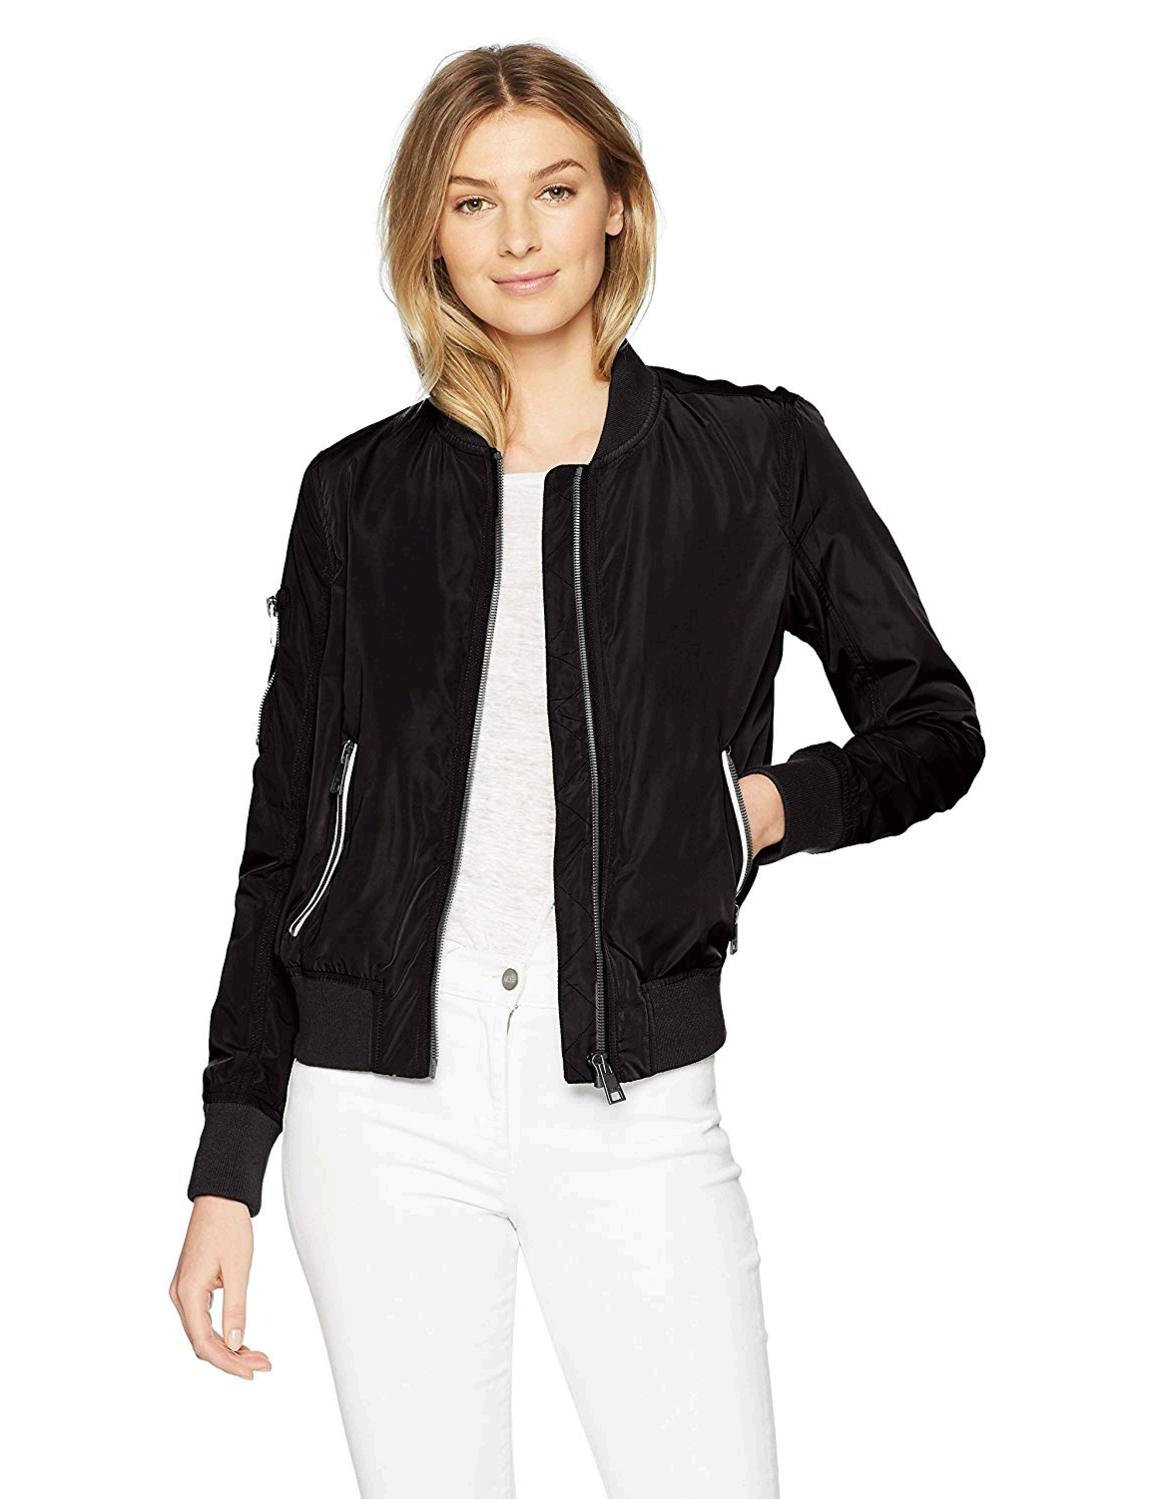 Levi's Women's Poly Bomber Jacket with Contrast Zipper, Black, Size ...